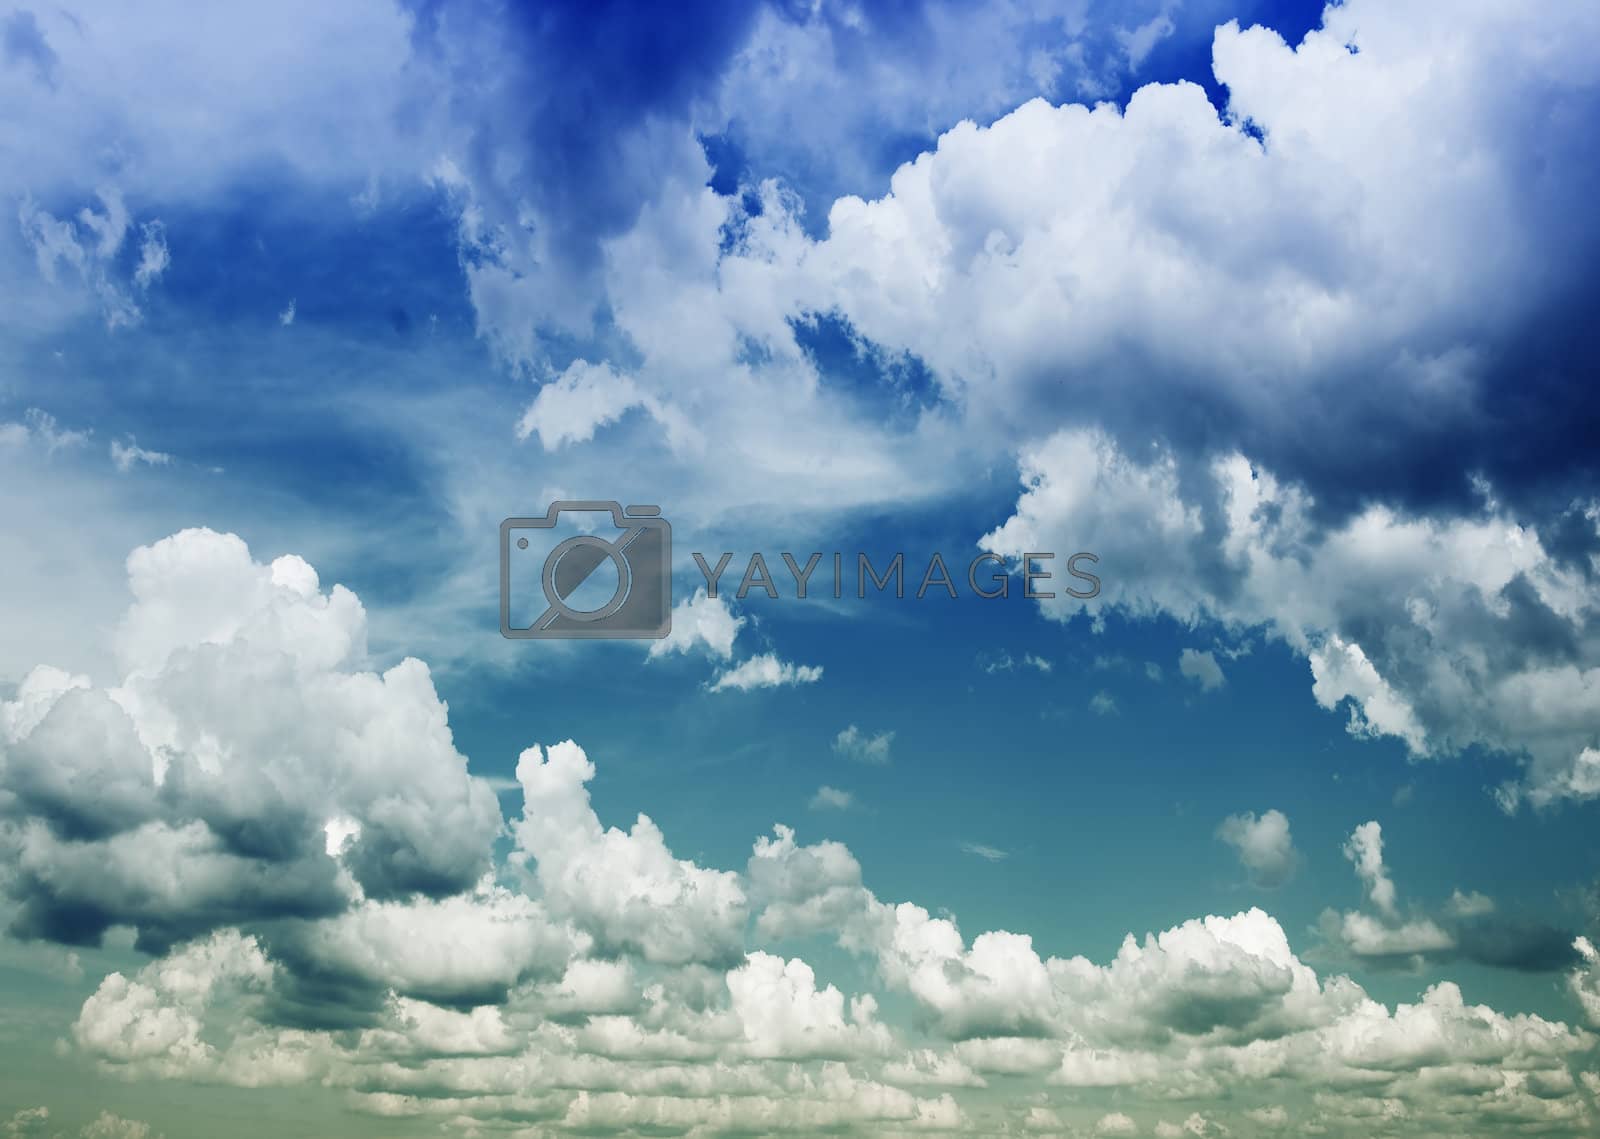 Royalty free image of Background Of Cloudy Sky by SubbotinaA